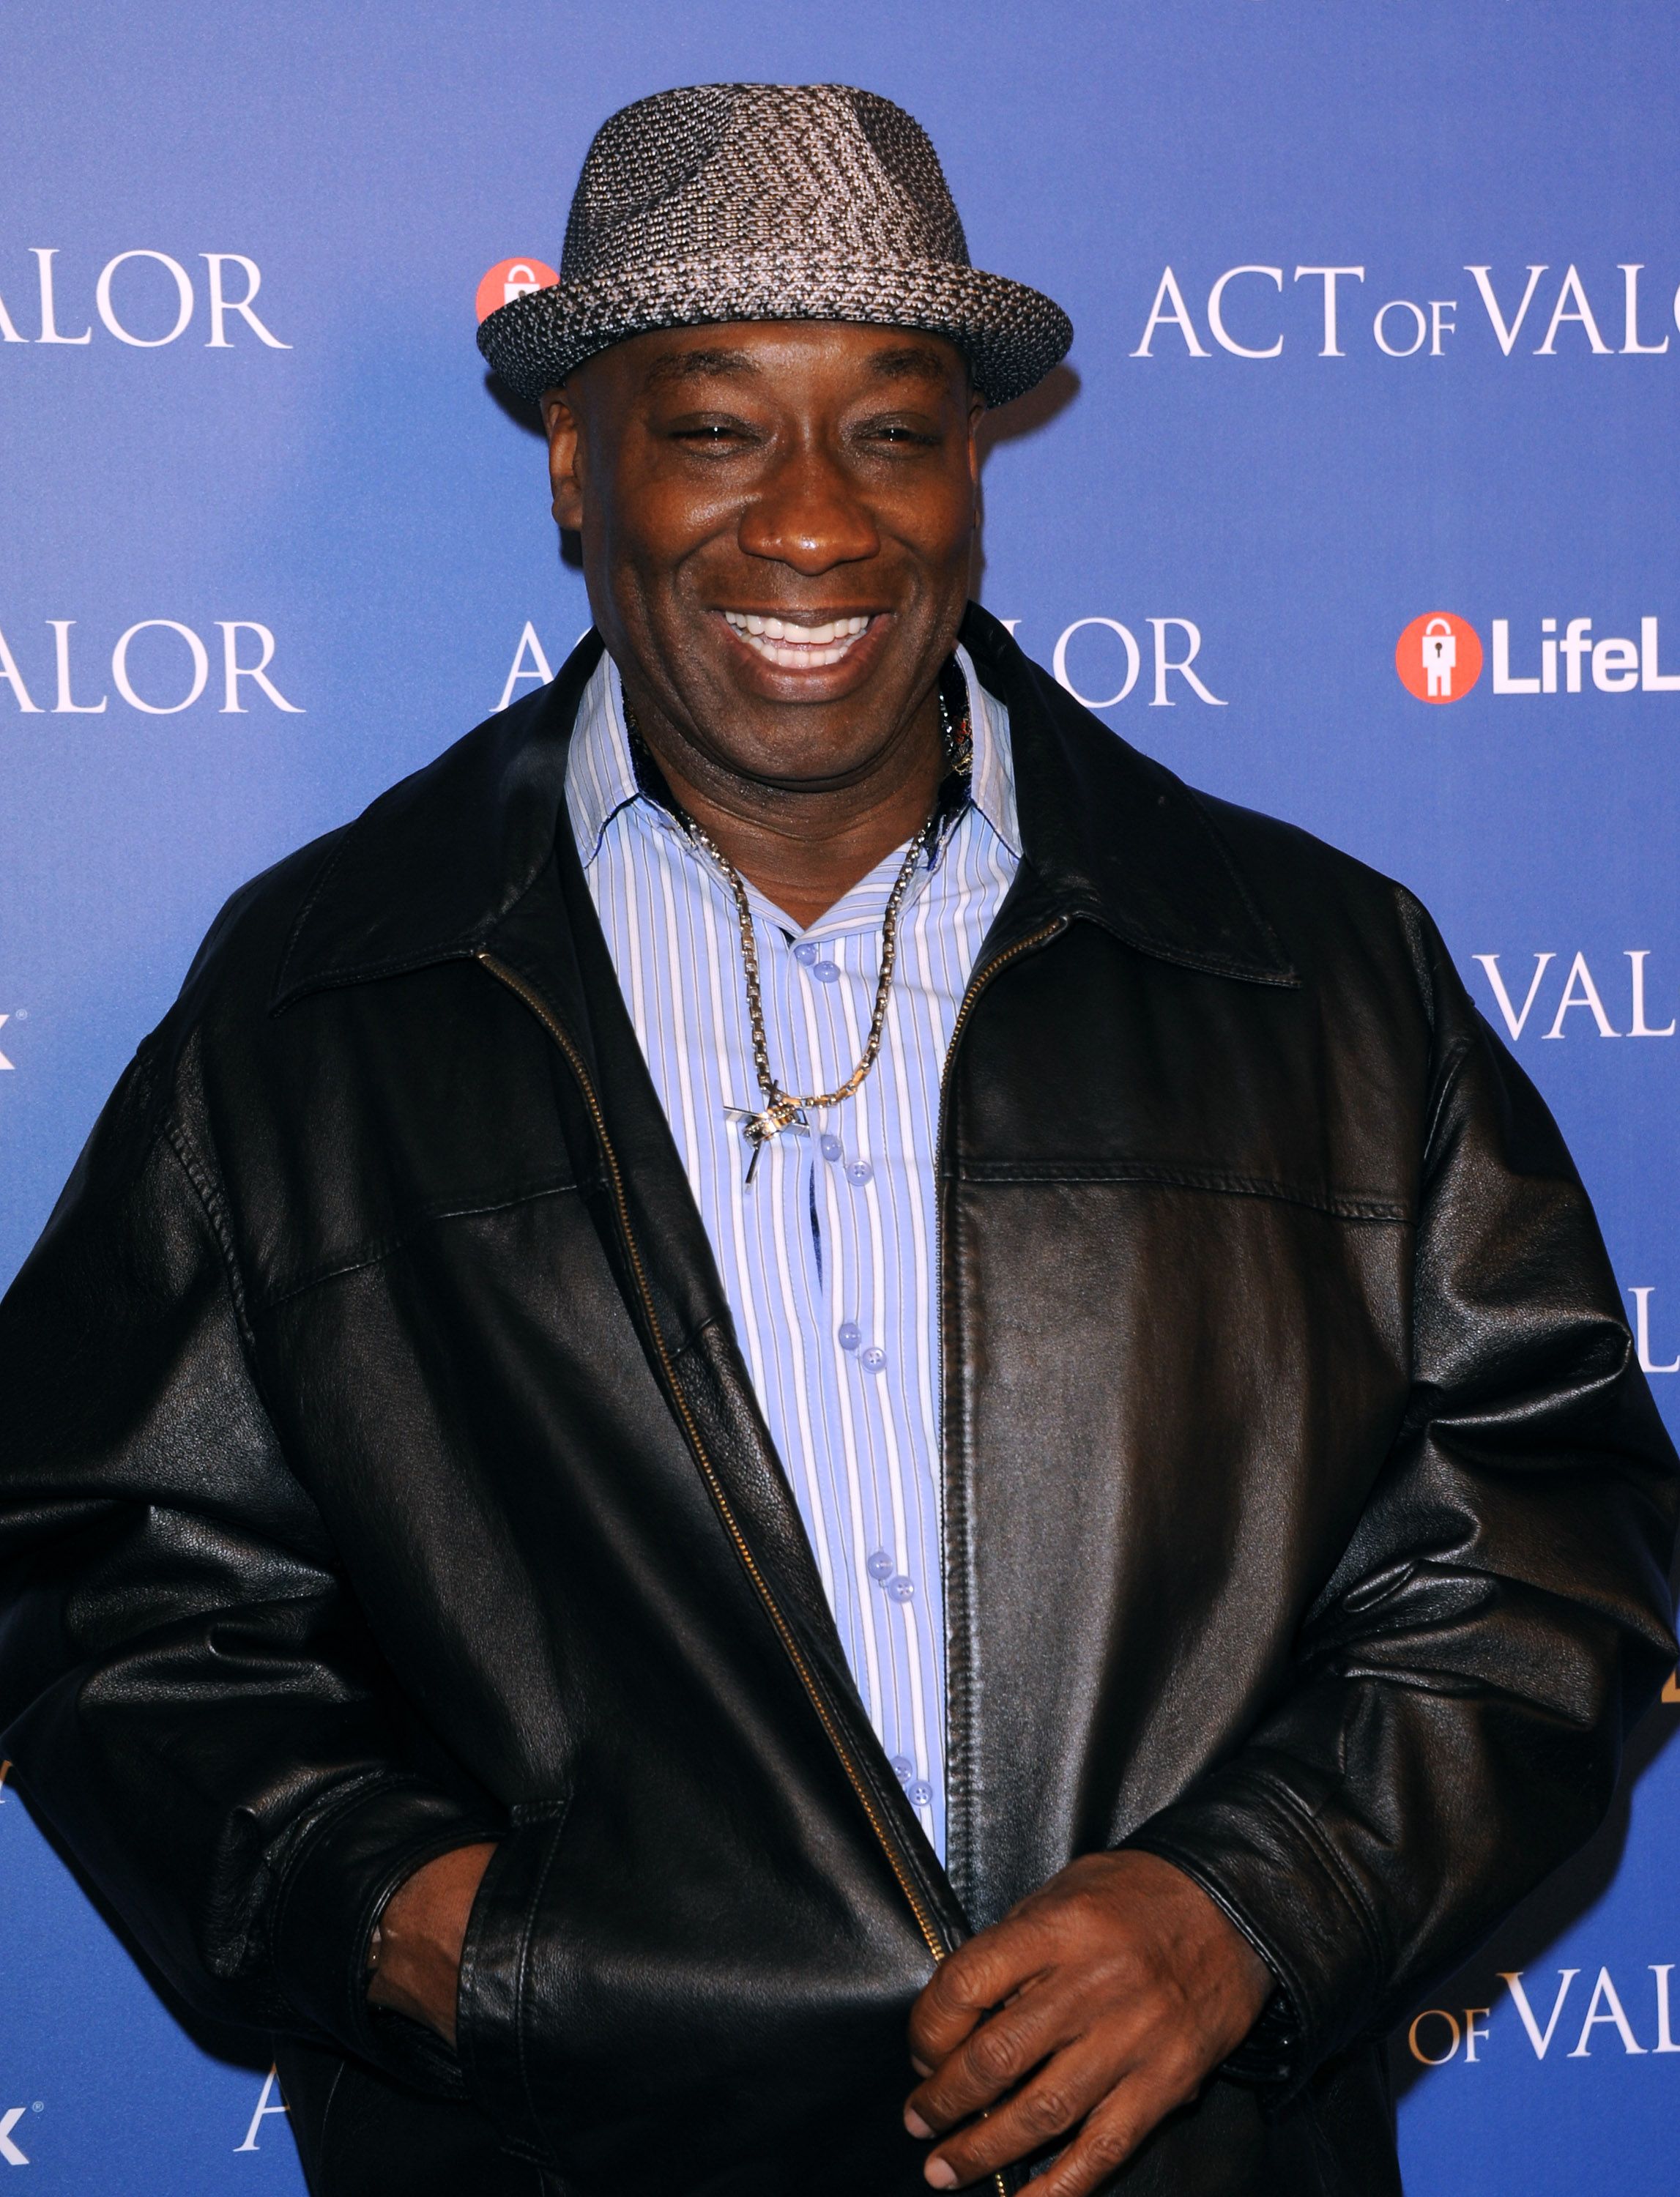 Michael Clarke Duncan attends the premiere of Relativity Media's 'Act of Valor' at ArcLight Cinemas on February 13, 2012 in Hollywood, California. | Source: Getty Images